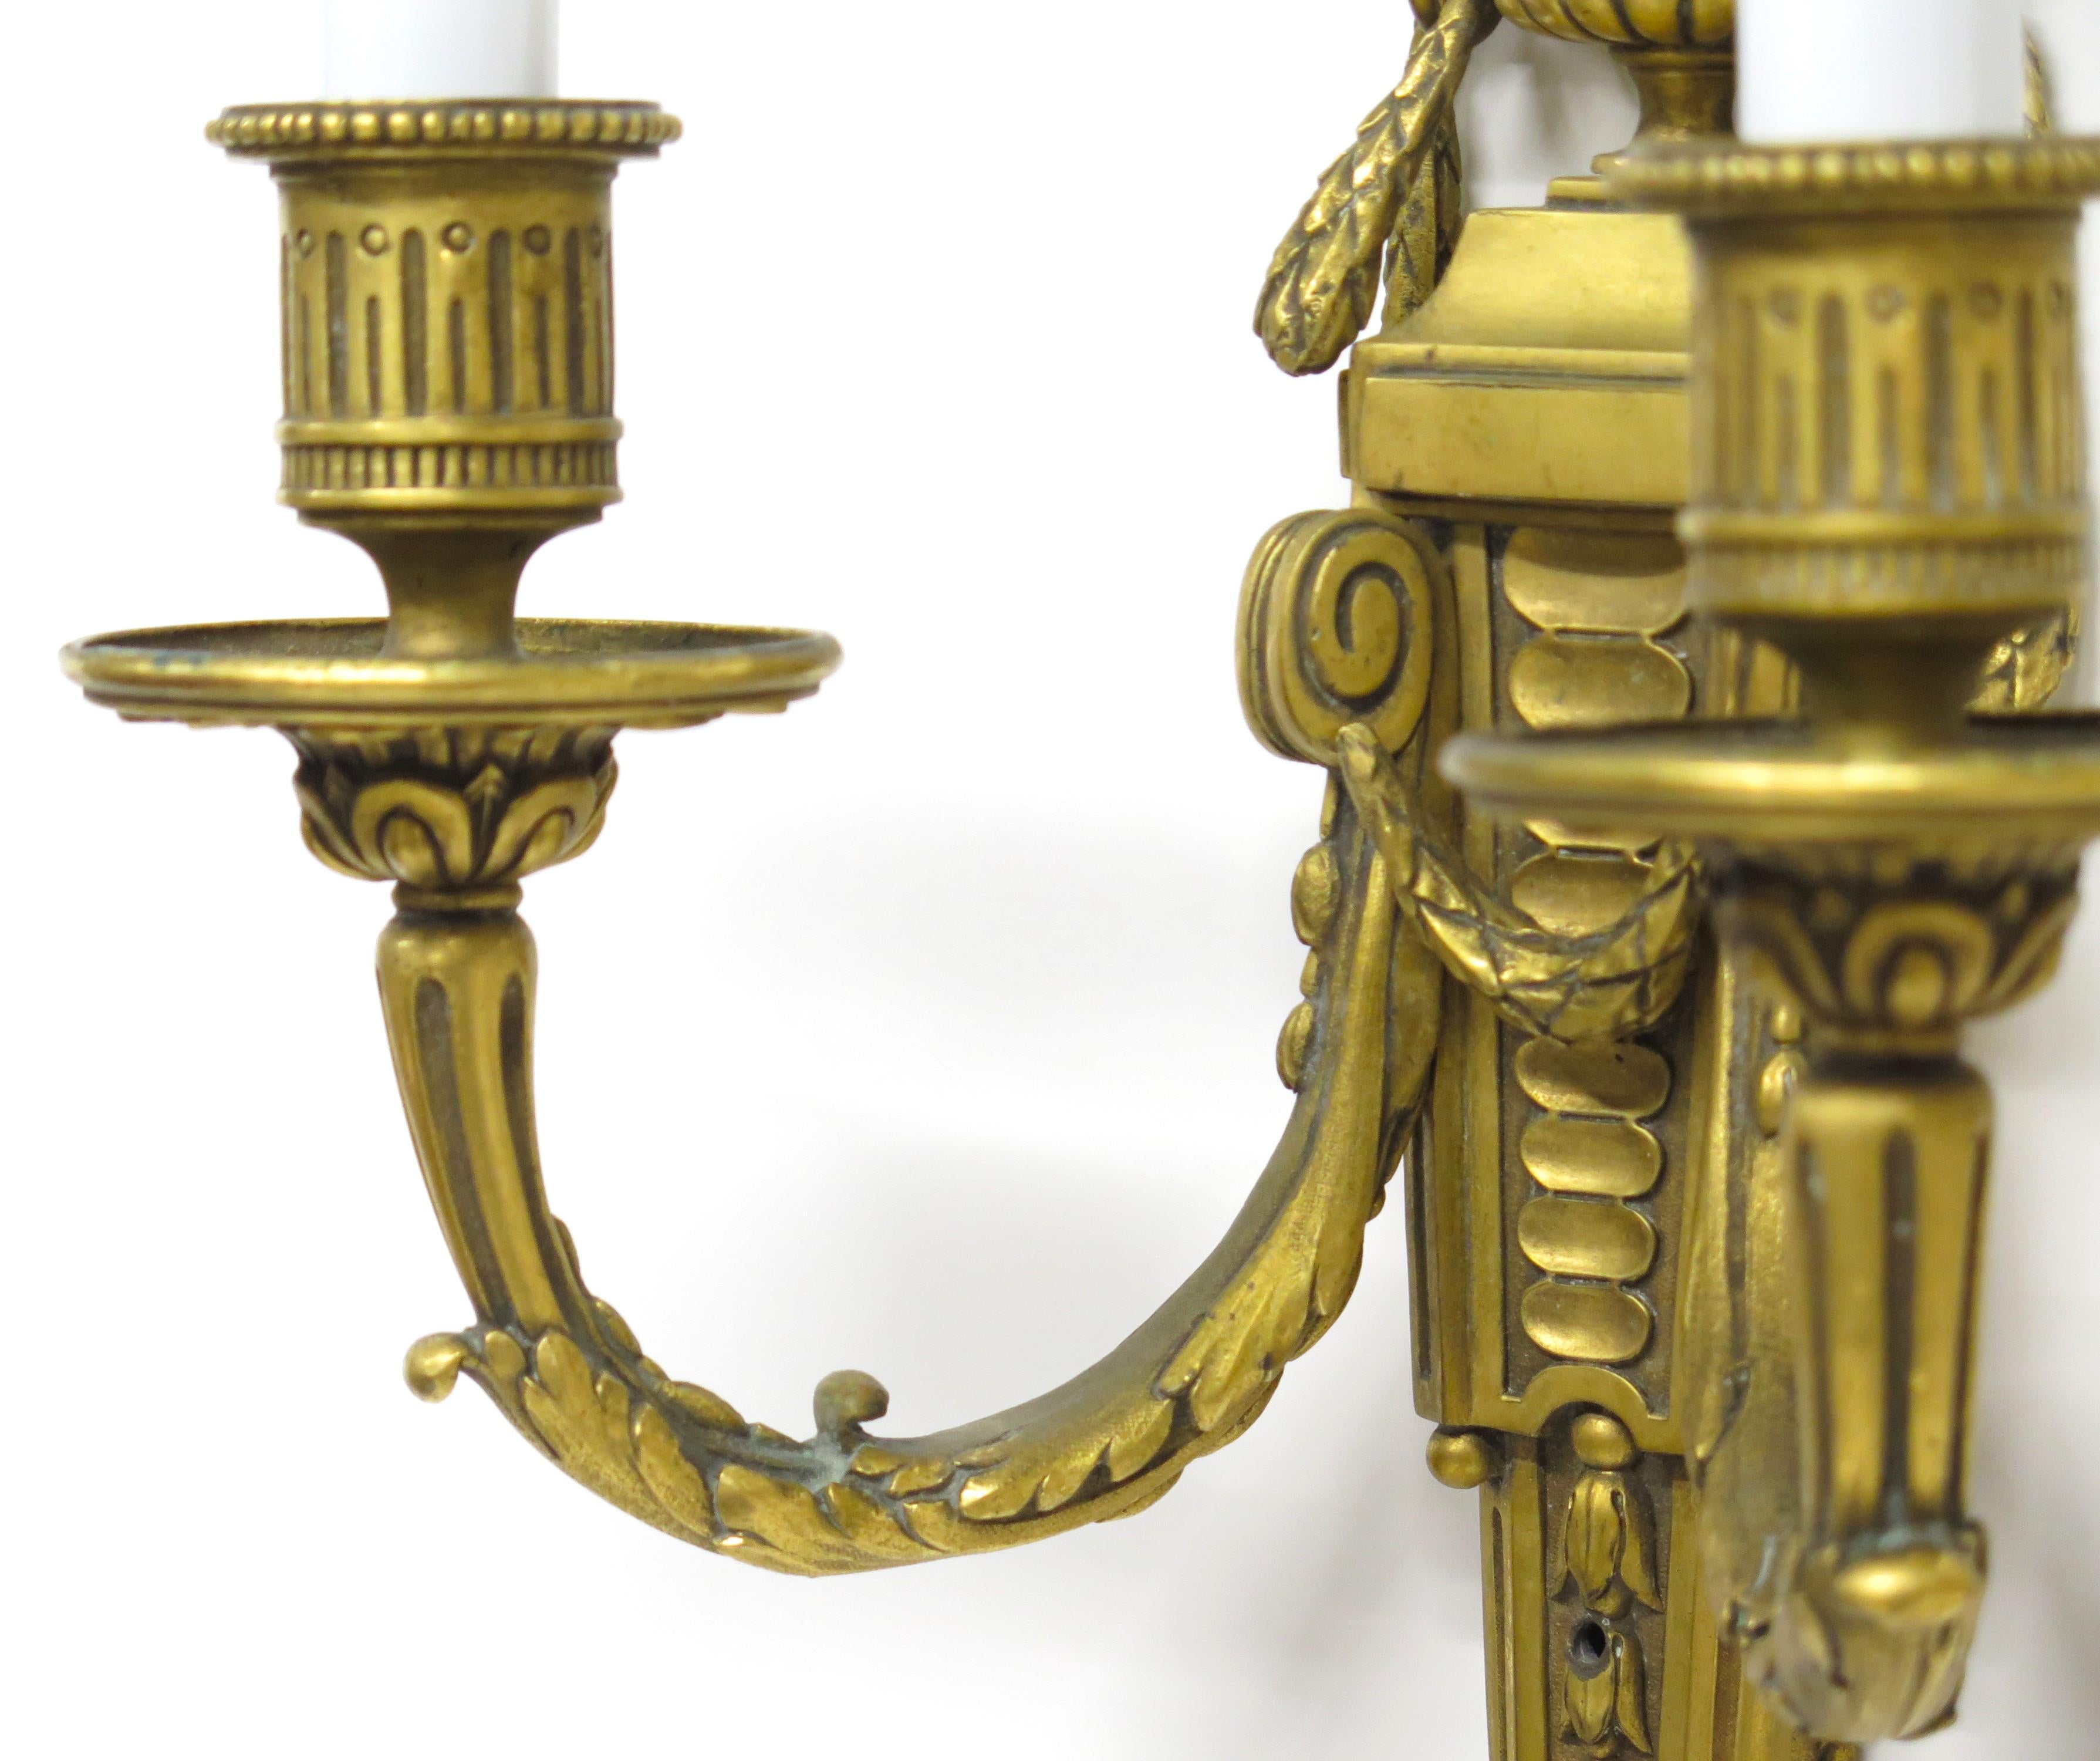 20th Century Pair of Louis XVI-style Two Light Sconces by Edward F. Caldwell & Co., New York